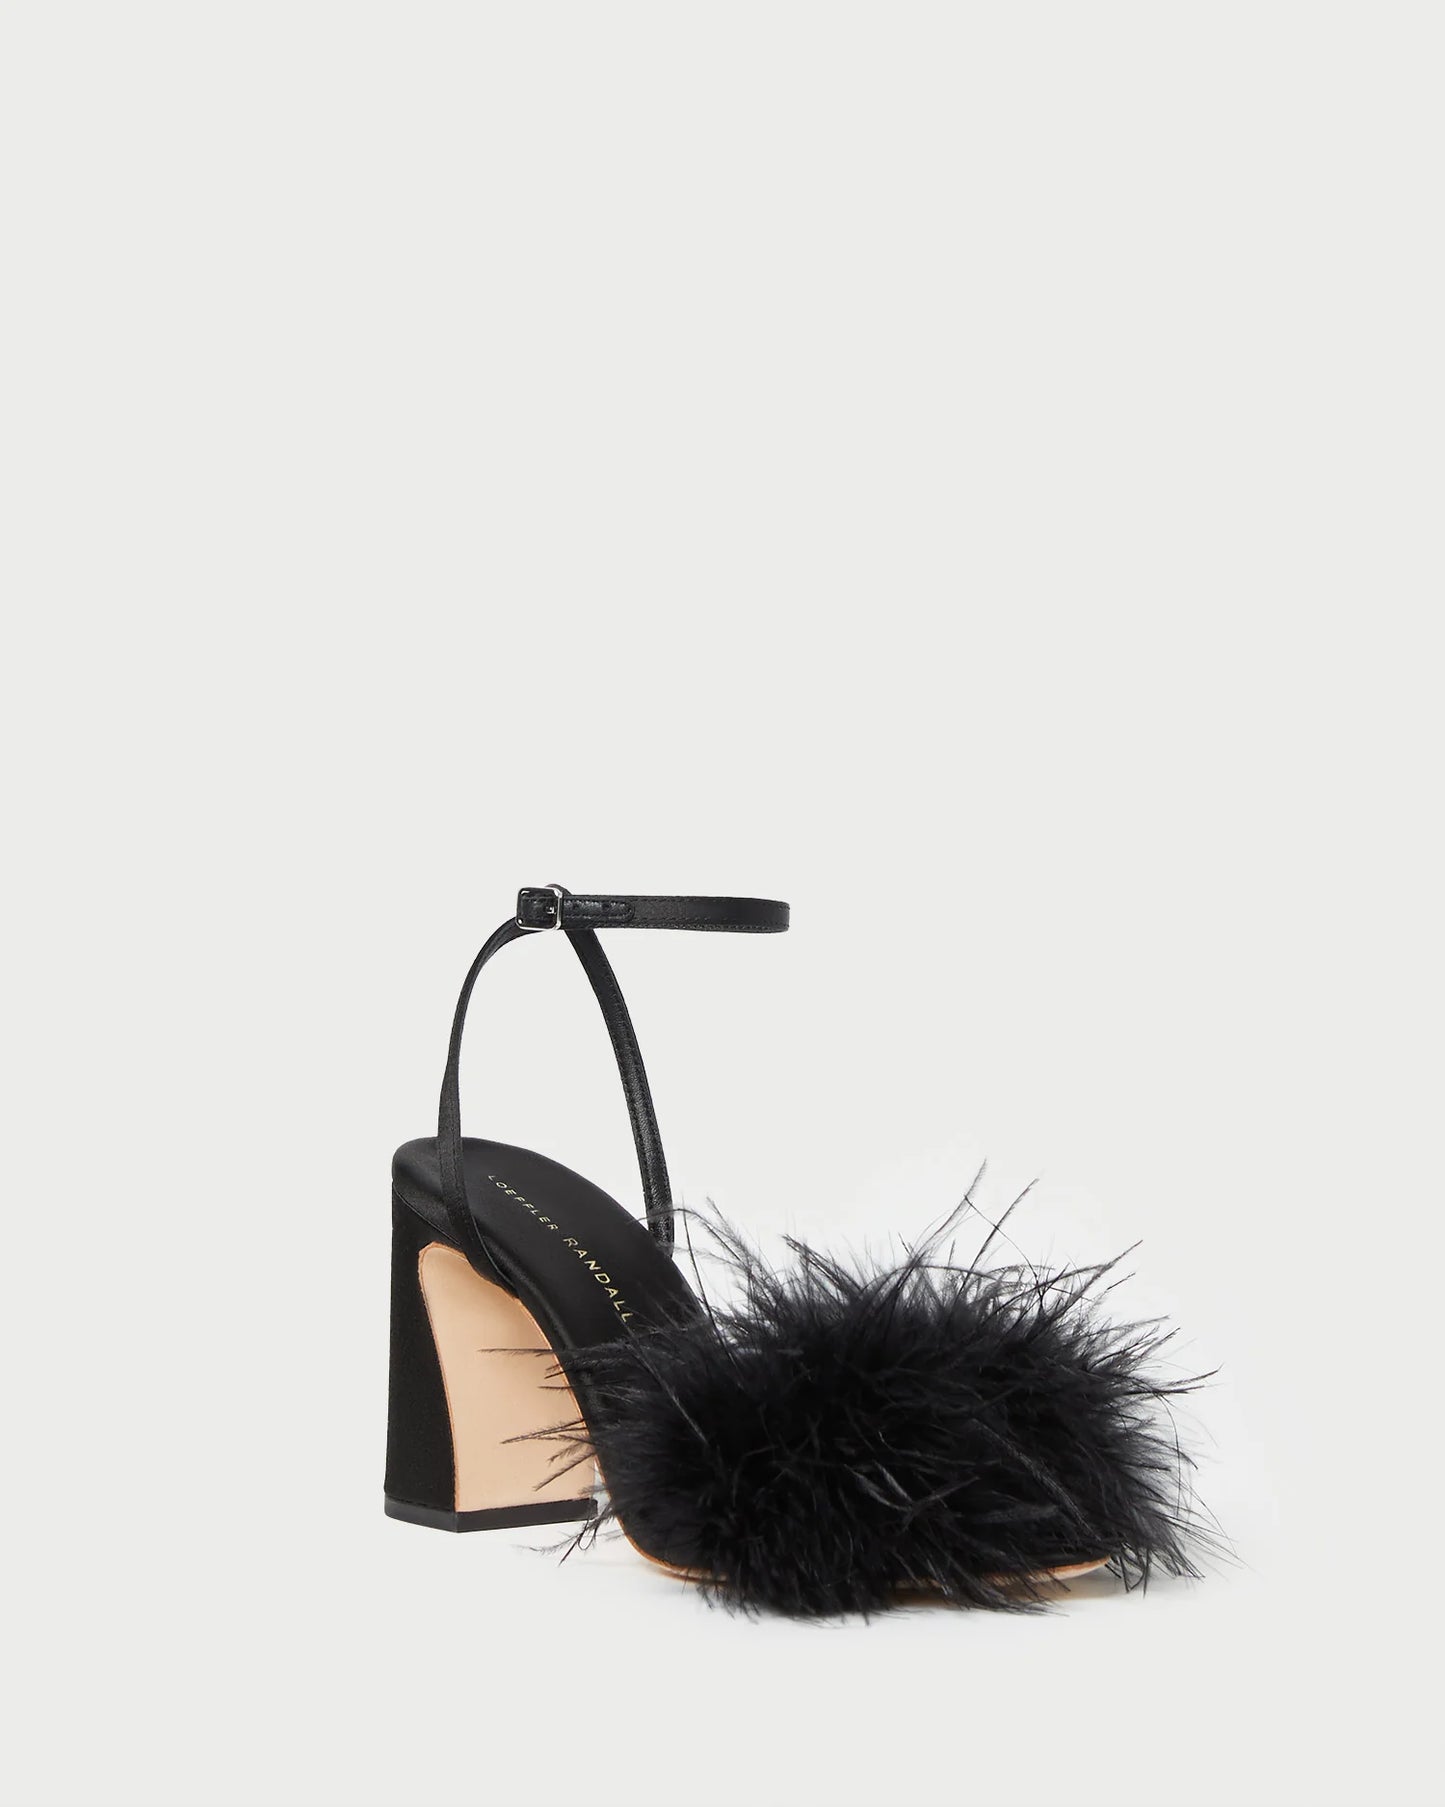 MINERVA SIMPLE SANDAL WITH FEATHERS